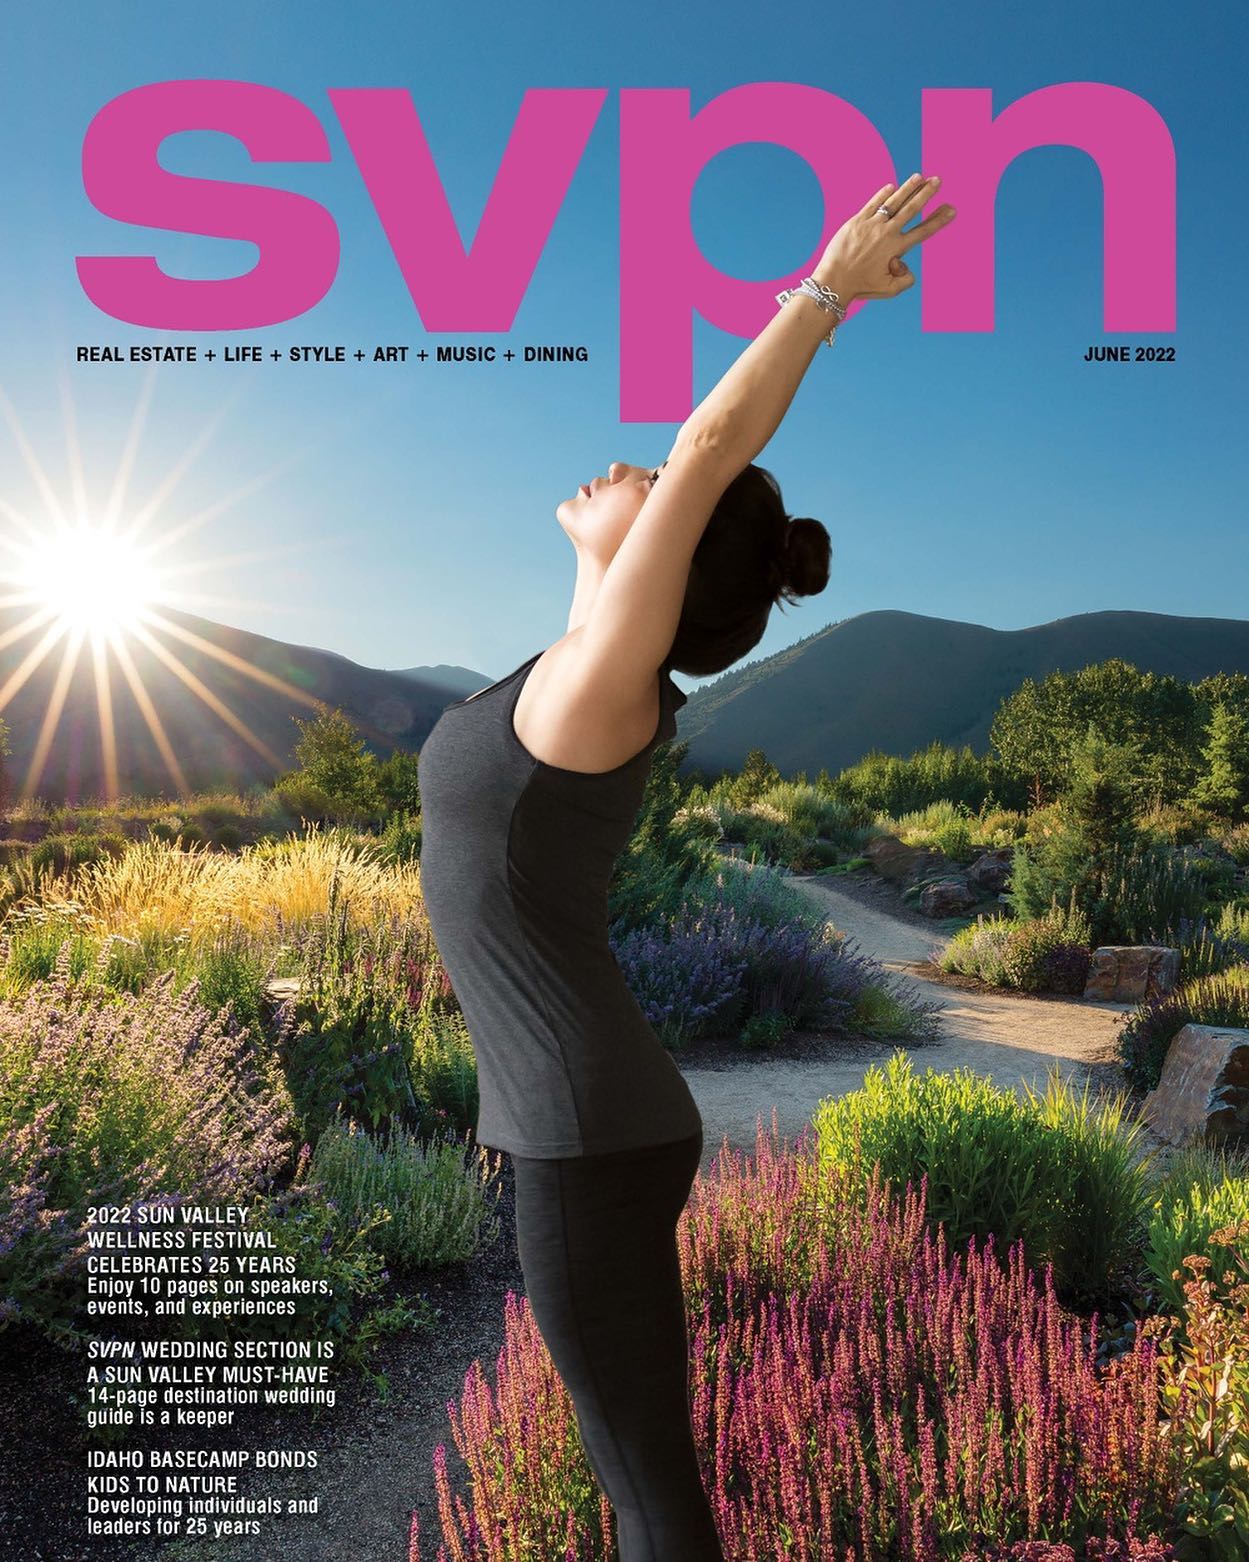 SVPN Magazine June 2022 arrives on Wednesday, June 8!

The 2022 summer season is upon us. For our June issue, SVPN Magazine features the 25th Sun Valley Wellness Festival with speakers and activities that will contribute to a healthy and purposeful life. SVPN Magazine features ten pages of spotlight speakers and a rundown on what to do and when. In addition, we have a Sun Valley Wine Auction preview, and for a second year, SVPN Magazine offers our treasured Wedding Section.

Meet the new owner of Windermere, Logan Frederickson, and celebrate the 25th anniversary of Idaho BaseCamp (IBC), changing the lives of fifth graders across the state of Idaho and for many other kids, especially in our backyard in the Lost River Valley. Along with many News&Views items, our Now Showing section presents several new exhibitions ready to see, and Arts Etc. with a plethora of events and activities, including concerts where we welcome Nashville’s The Cadillac Three performing at the Sun Valley Pavilion with the Powell Brothers. And don’t miss out on Style Dial must-haves and how The Open Room is styling us out for summer outdoor living.

SVPN Magazine wellness contributors St. Luke’s and Dr. Molly Brown have our health in mind as we all start to move around more. And the Sun Valley Restaurant Association Dining Guide lists all the great options for good eats when we need entertaining family and guests. @svpnmagazine #svpnmagazine #sunvalleyidaho #sunvalleystyle #sunvalleysummer #idaho #livingthedream #myhomeisyourvacation #sunvalleylife #visitsunvalley #seeksunvalley